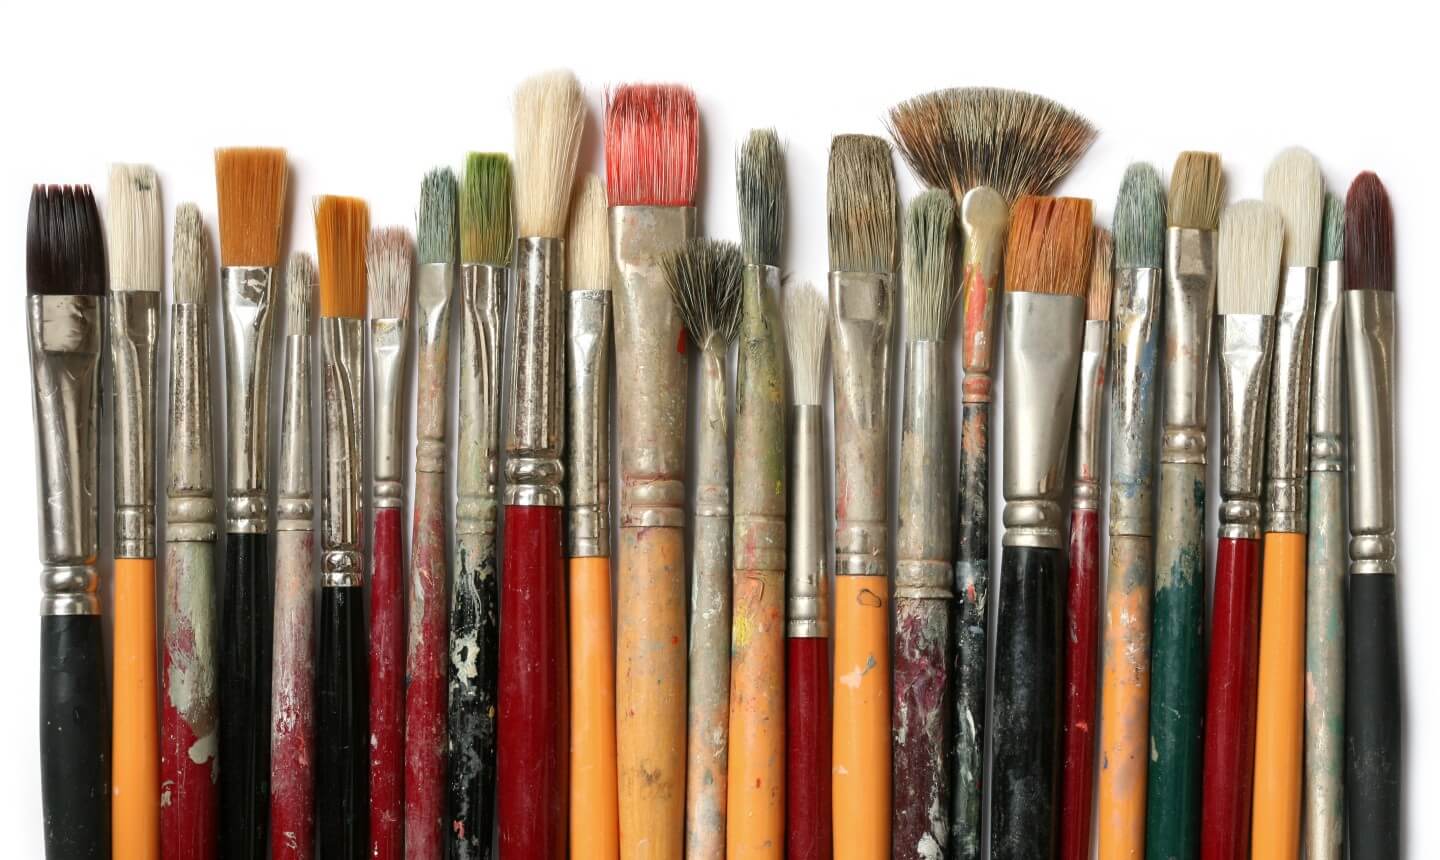 Budget or quality paint brushes